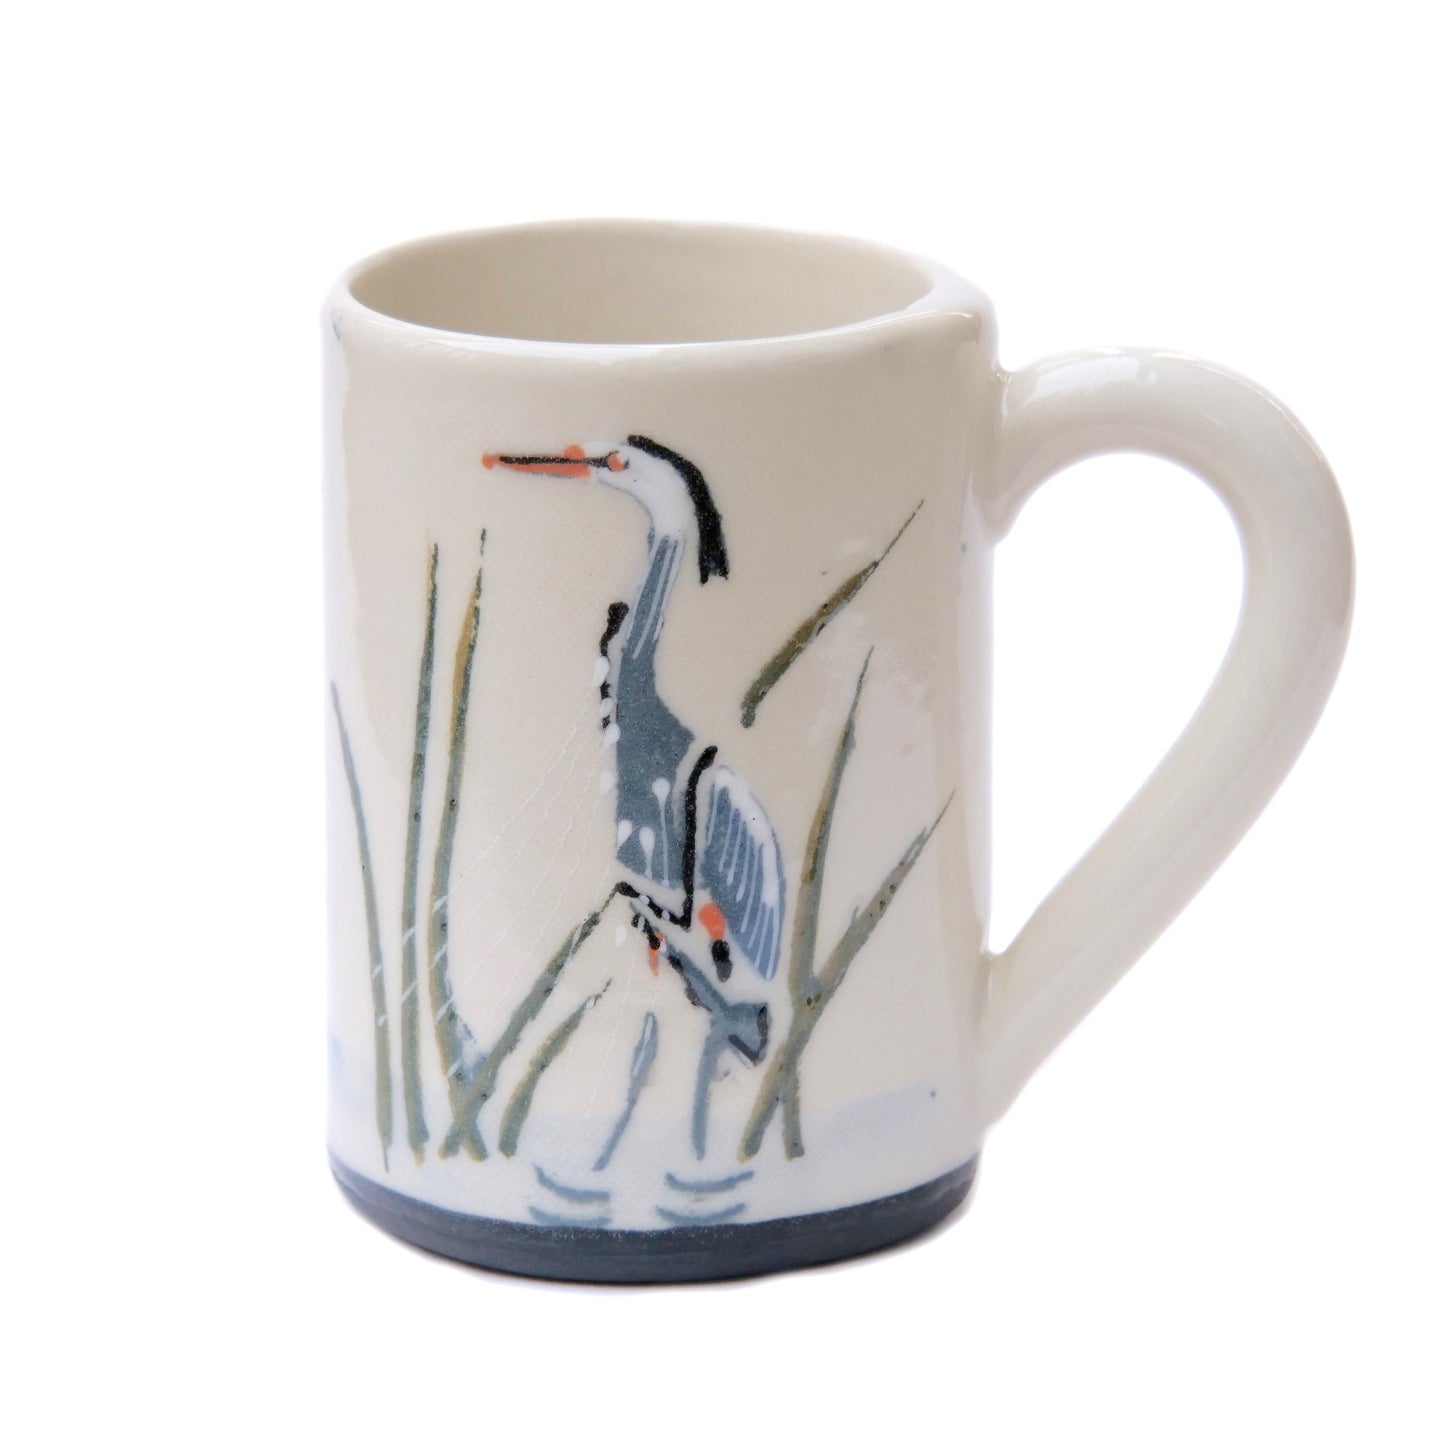 Handmade stoneware clay mug with Blue Heron painting, made in Canada by Susan Robertson Pottery.